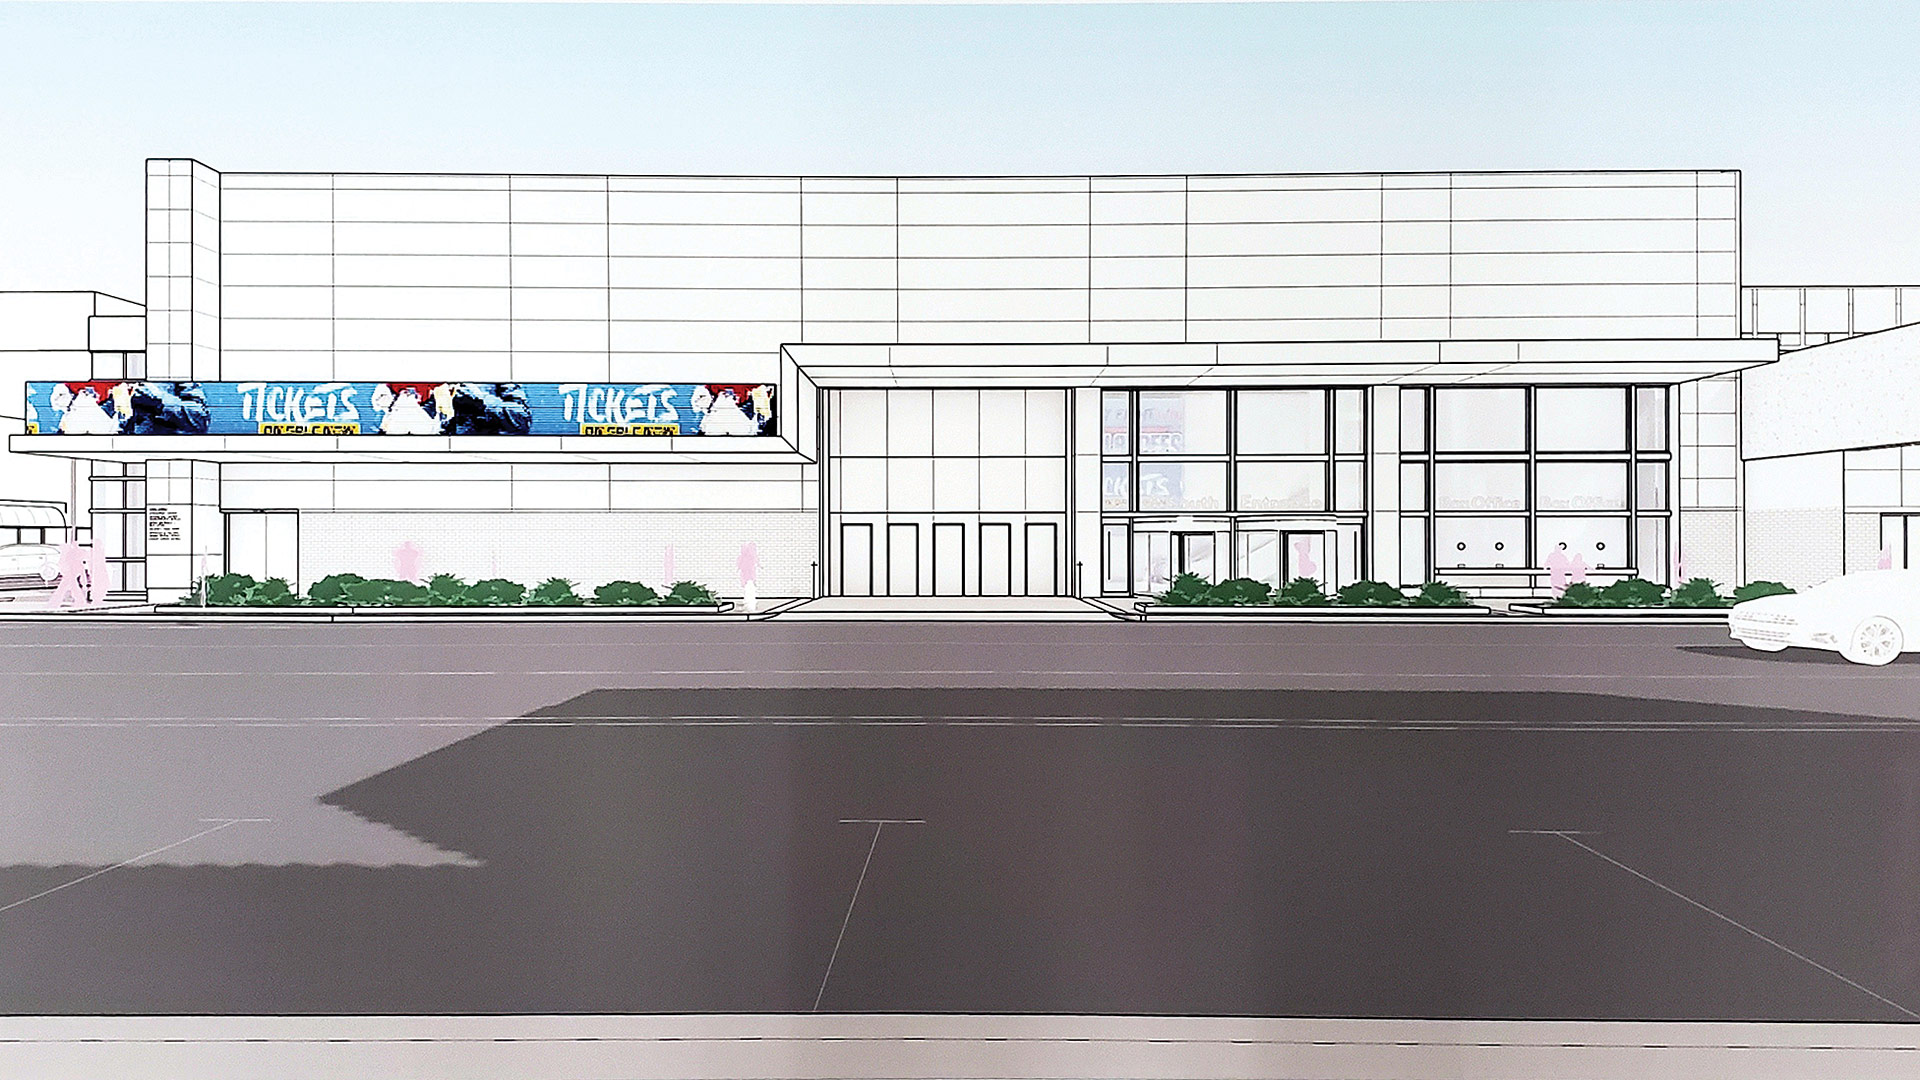 An architect’s rendering of the planned new entrance at the southwest corner of the MassMutual Center.